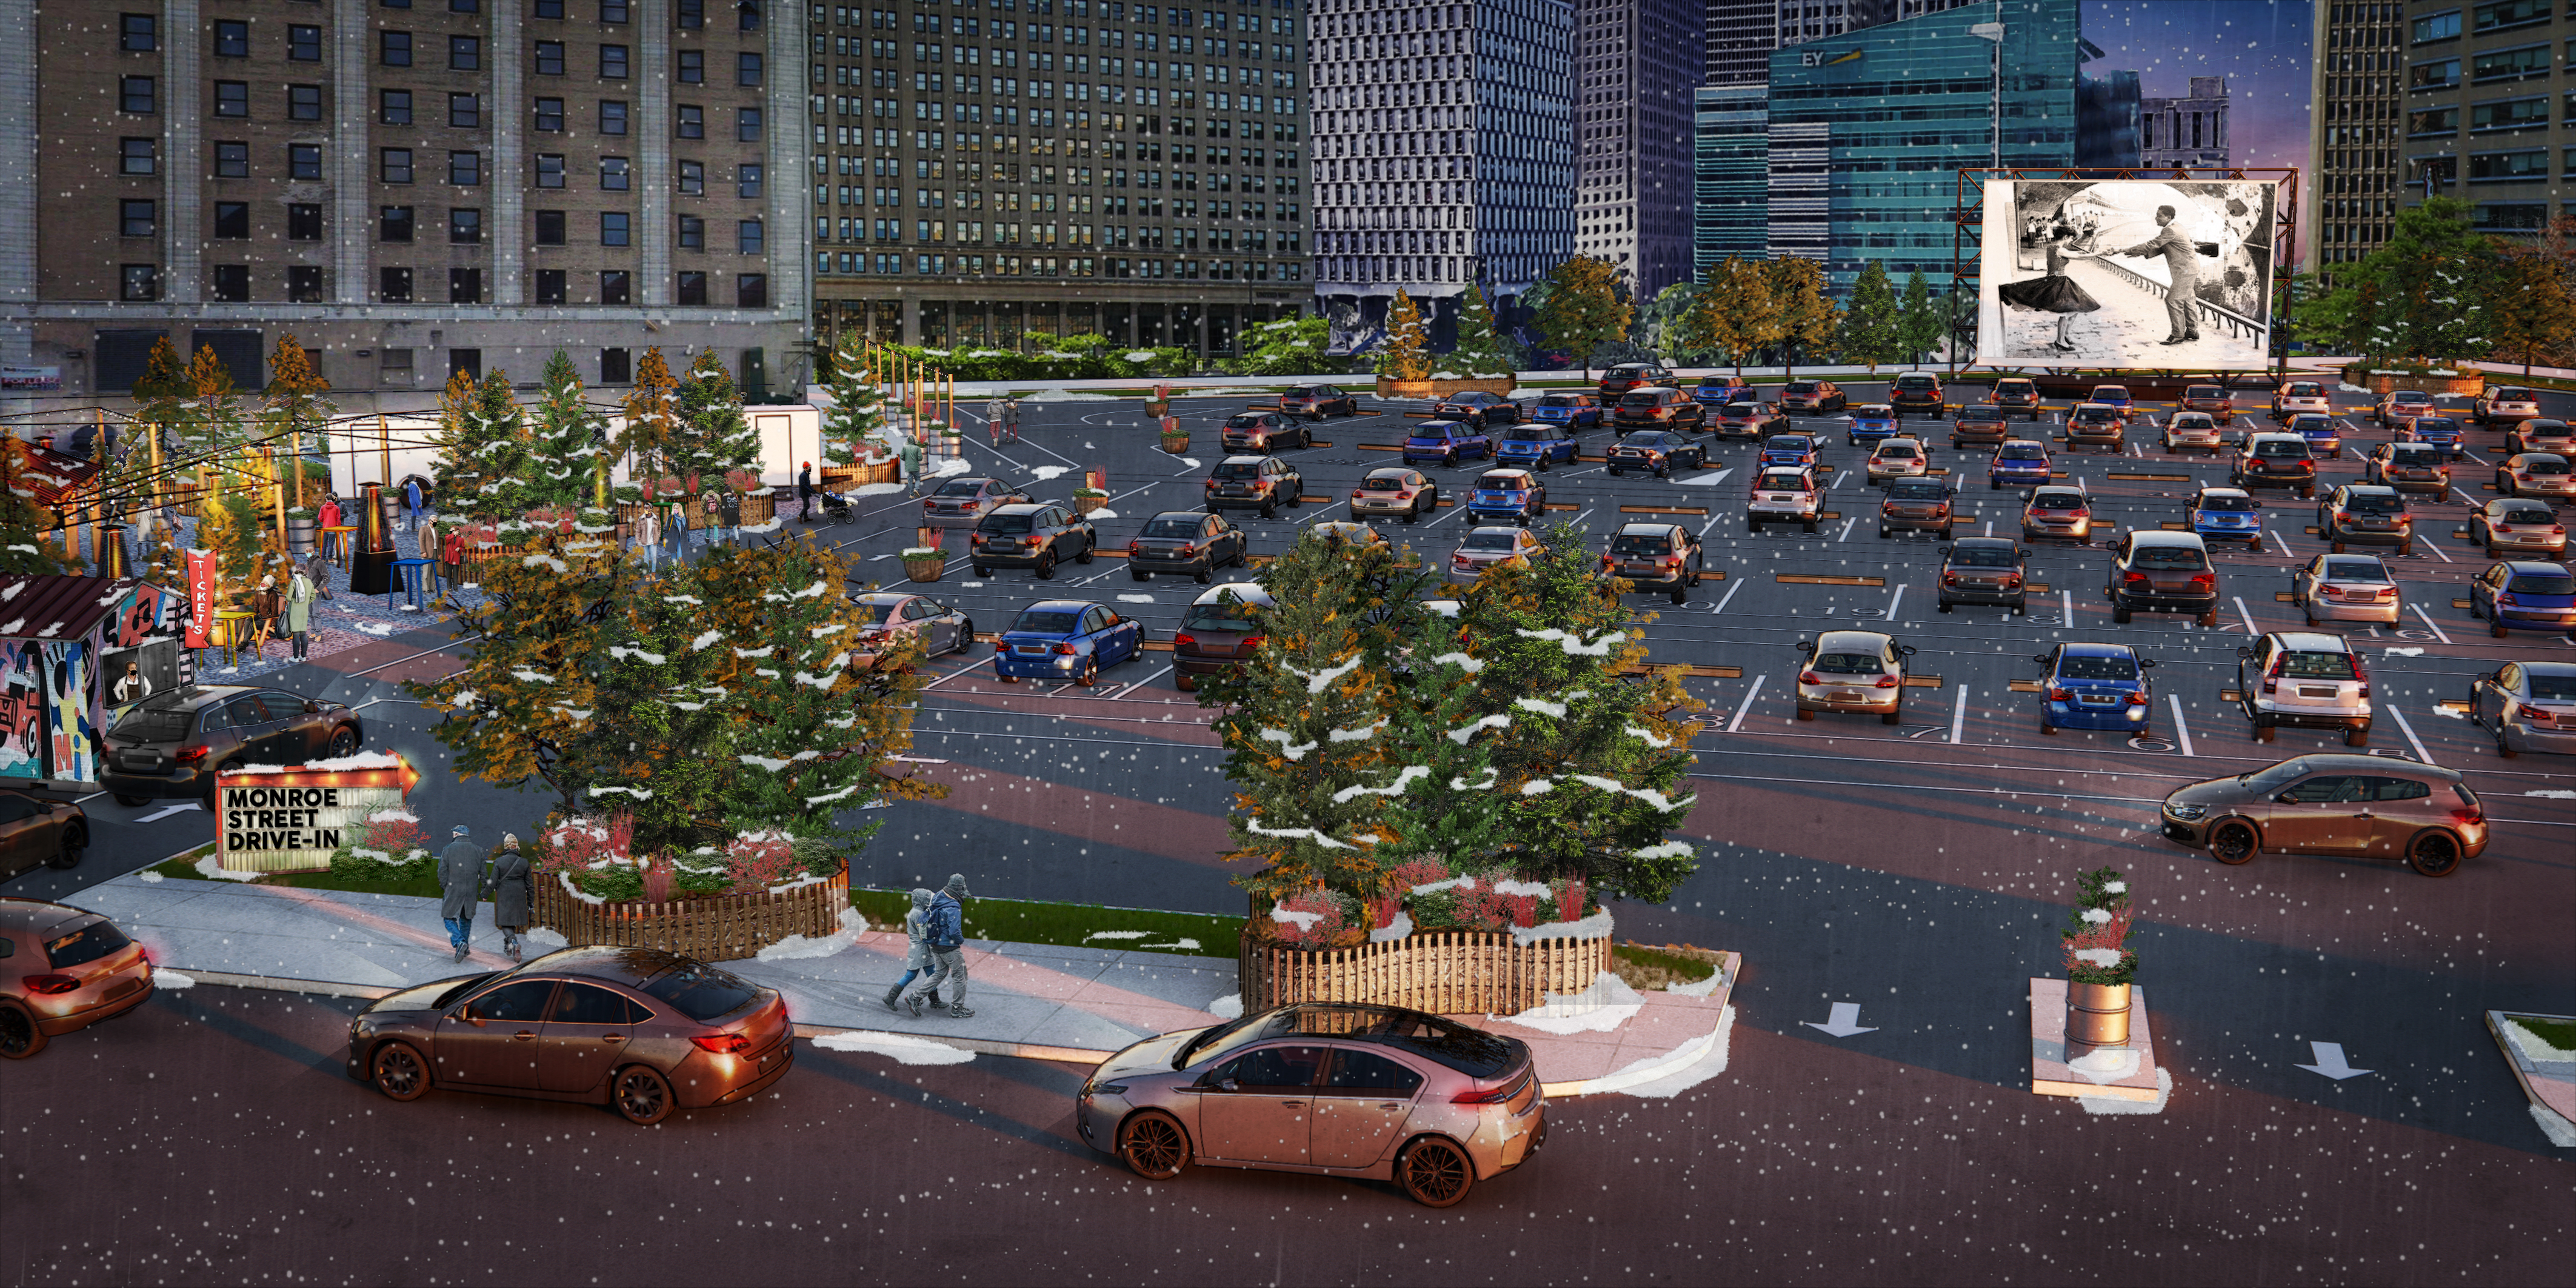 A rendering of cars parking at the Monroe Street Drive-in theater in downtown Detroit on a snowy day. 